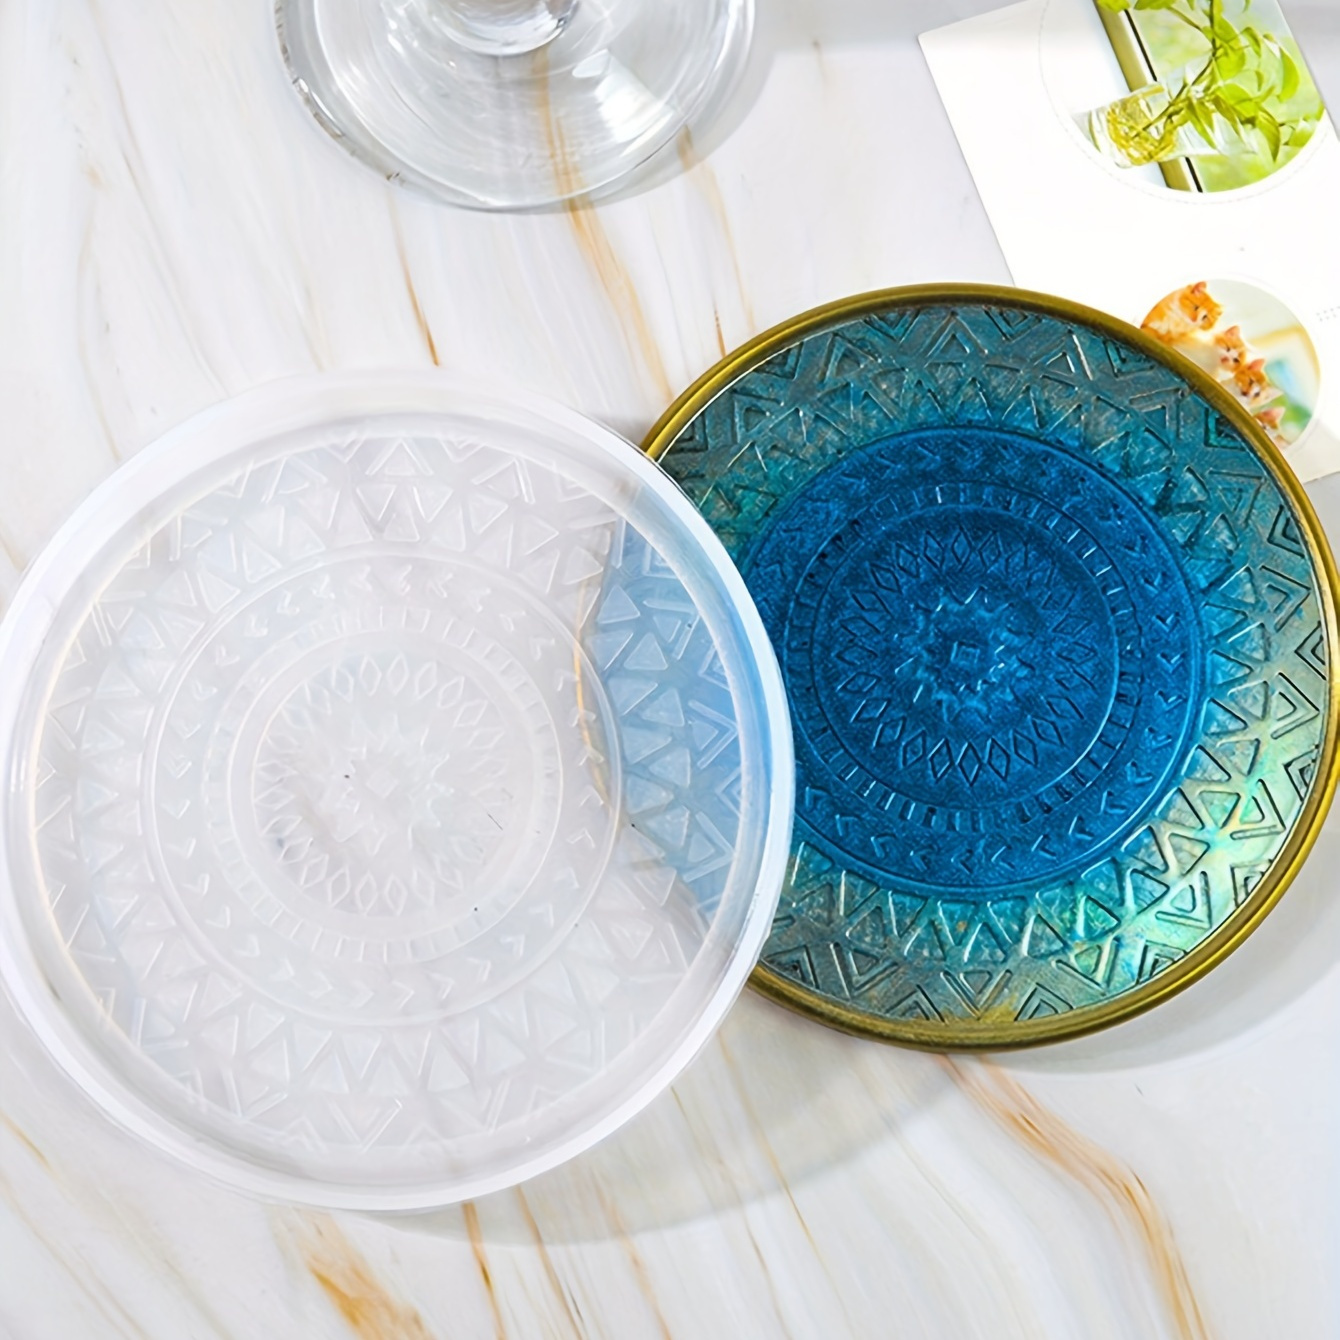 

Mandala Flower Pattern Silicone Coaster Mold - Round Crystal Epoxy Resin Cup Mat Mold For Diy Crafts (1pc)